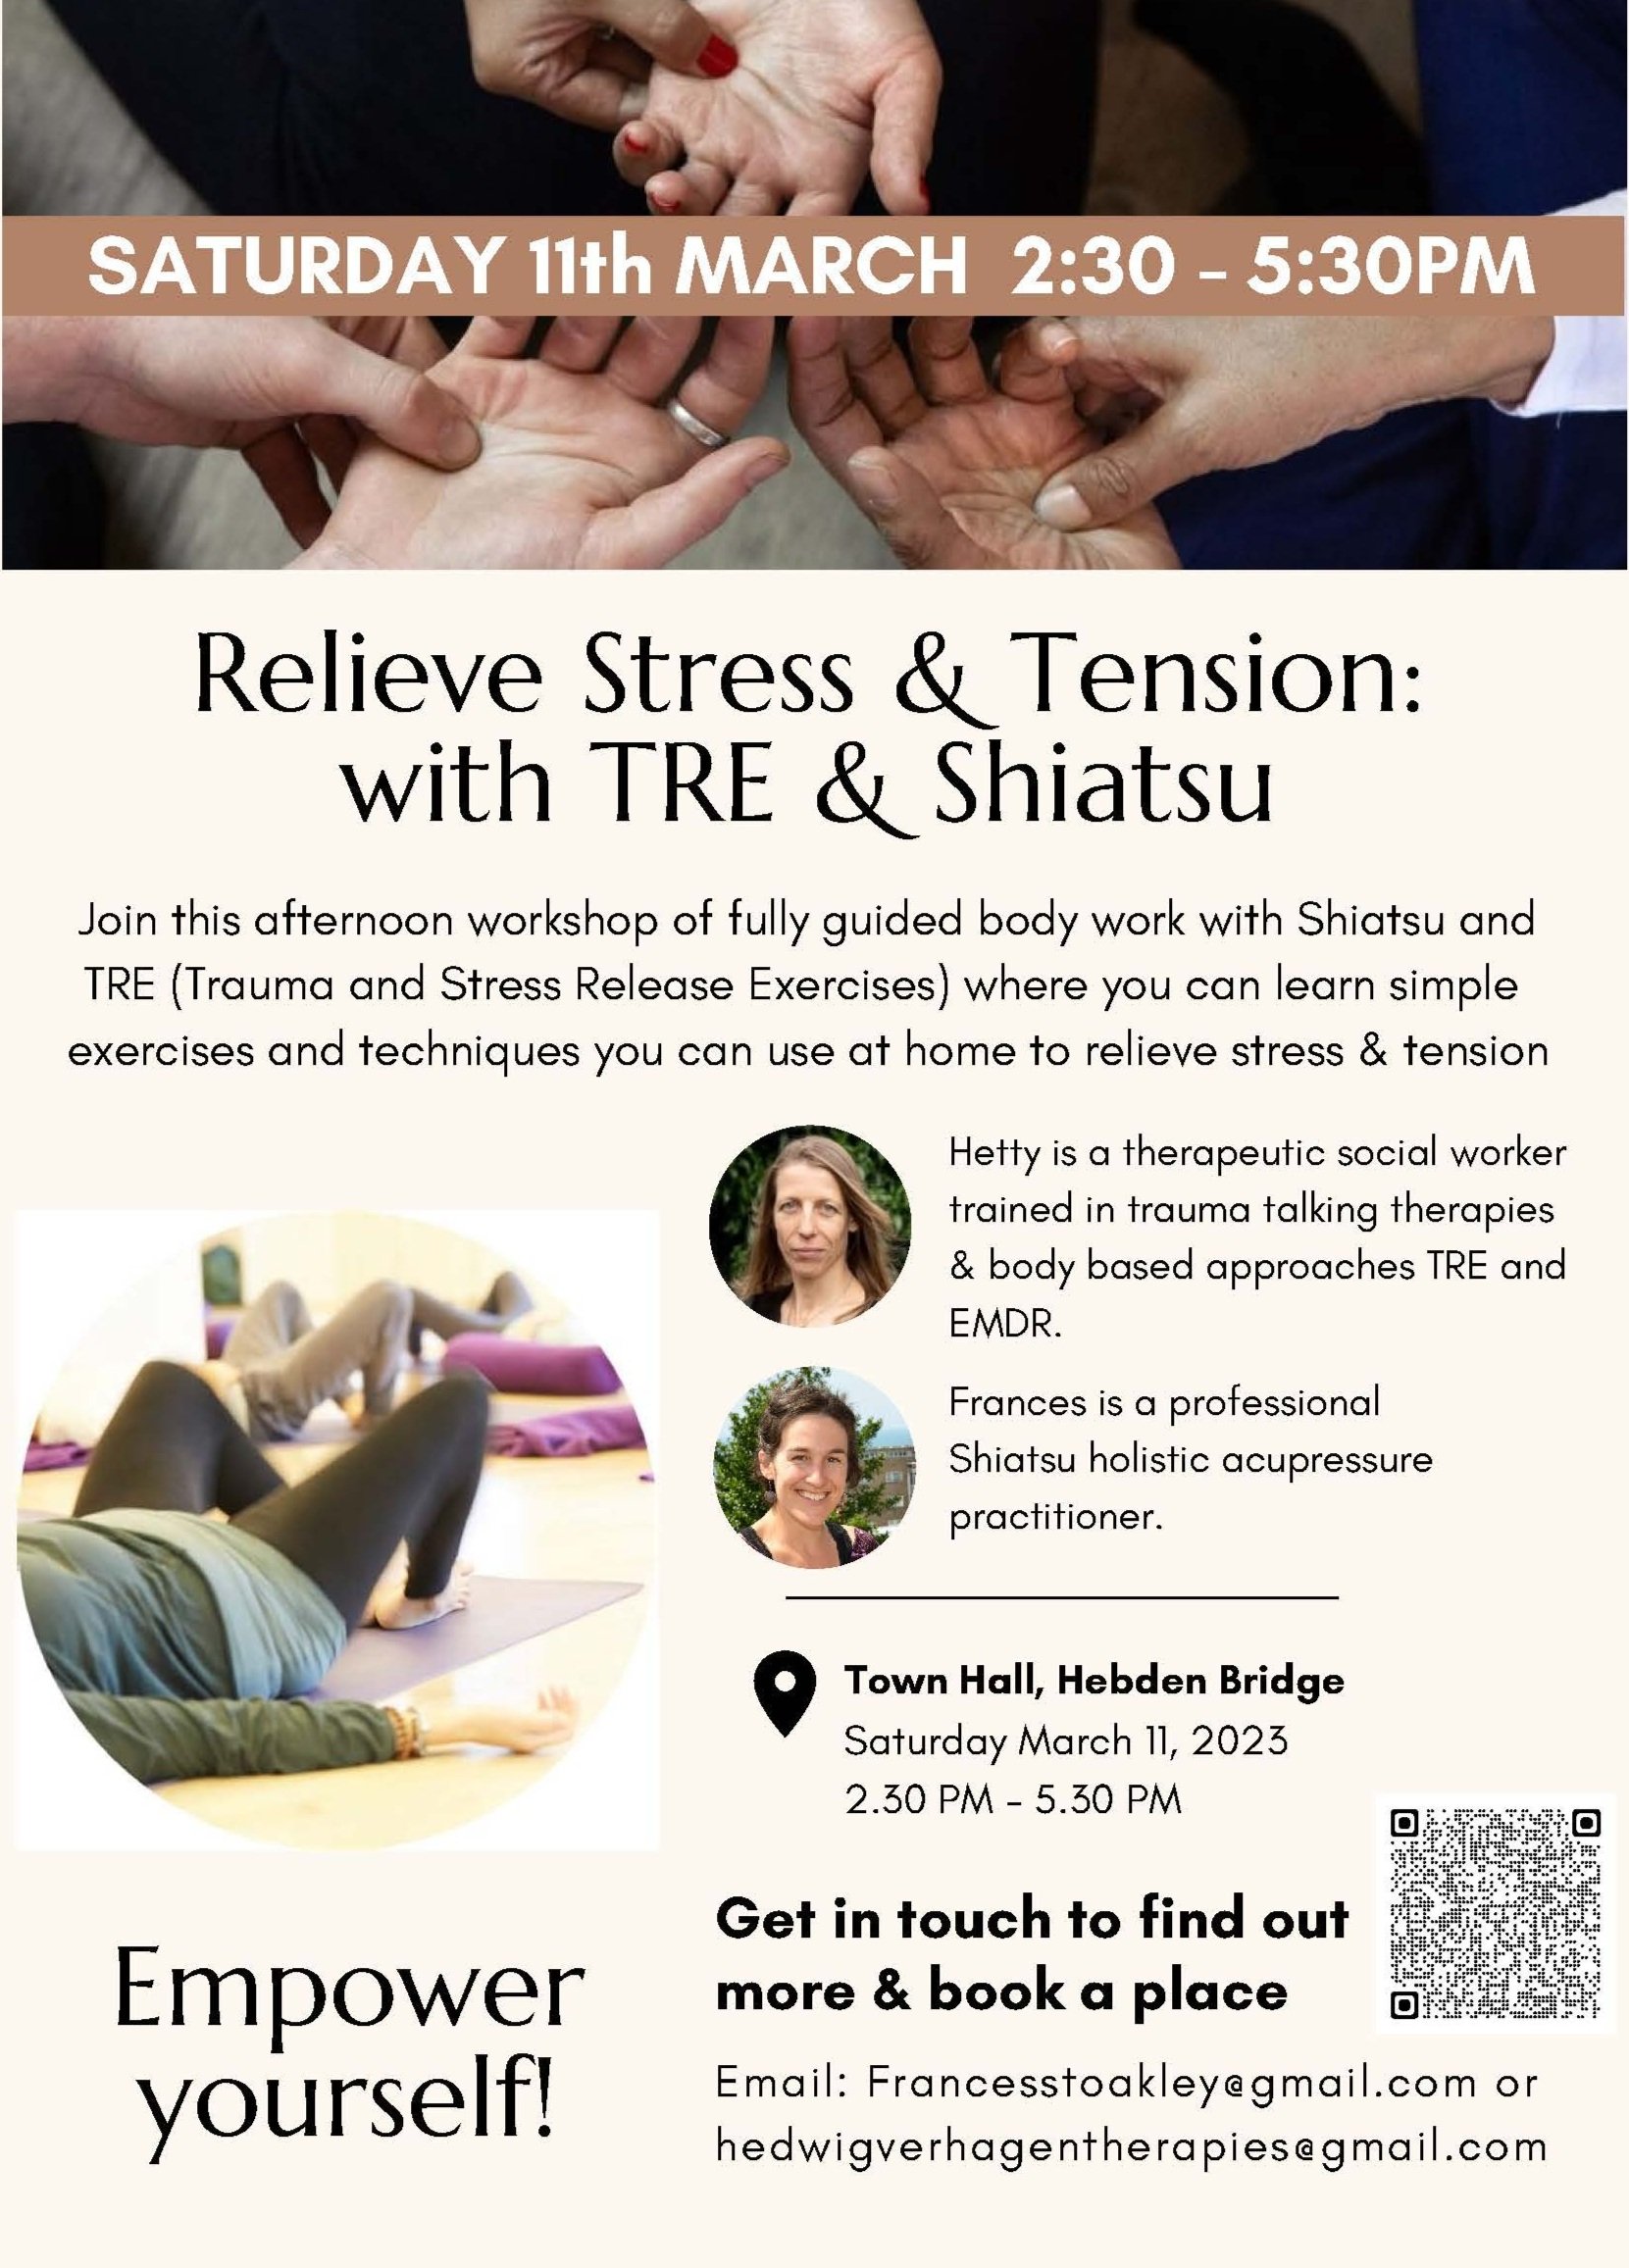 SHIATSU THERAPY – Promoting Health and Healing for More than 2000